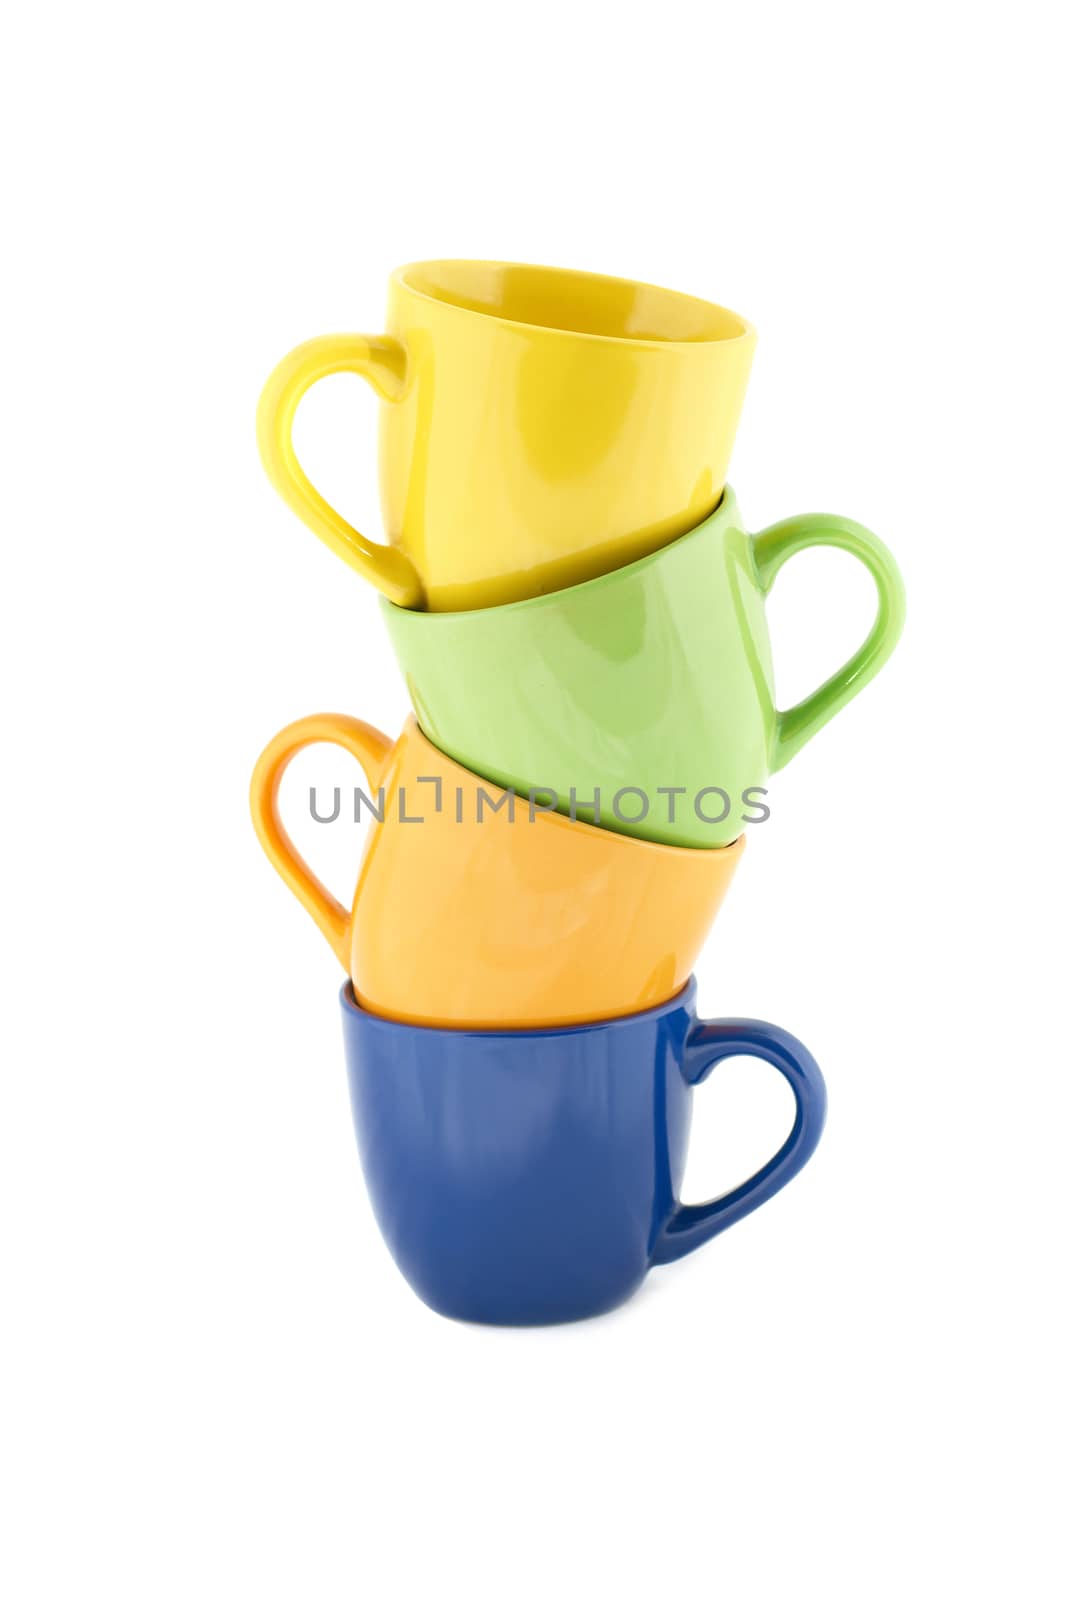 Tower of color cups by vapi